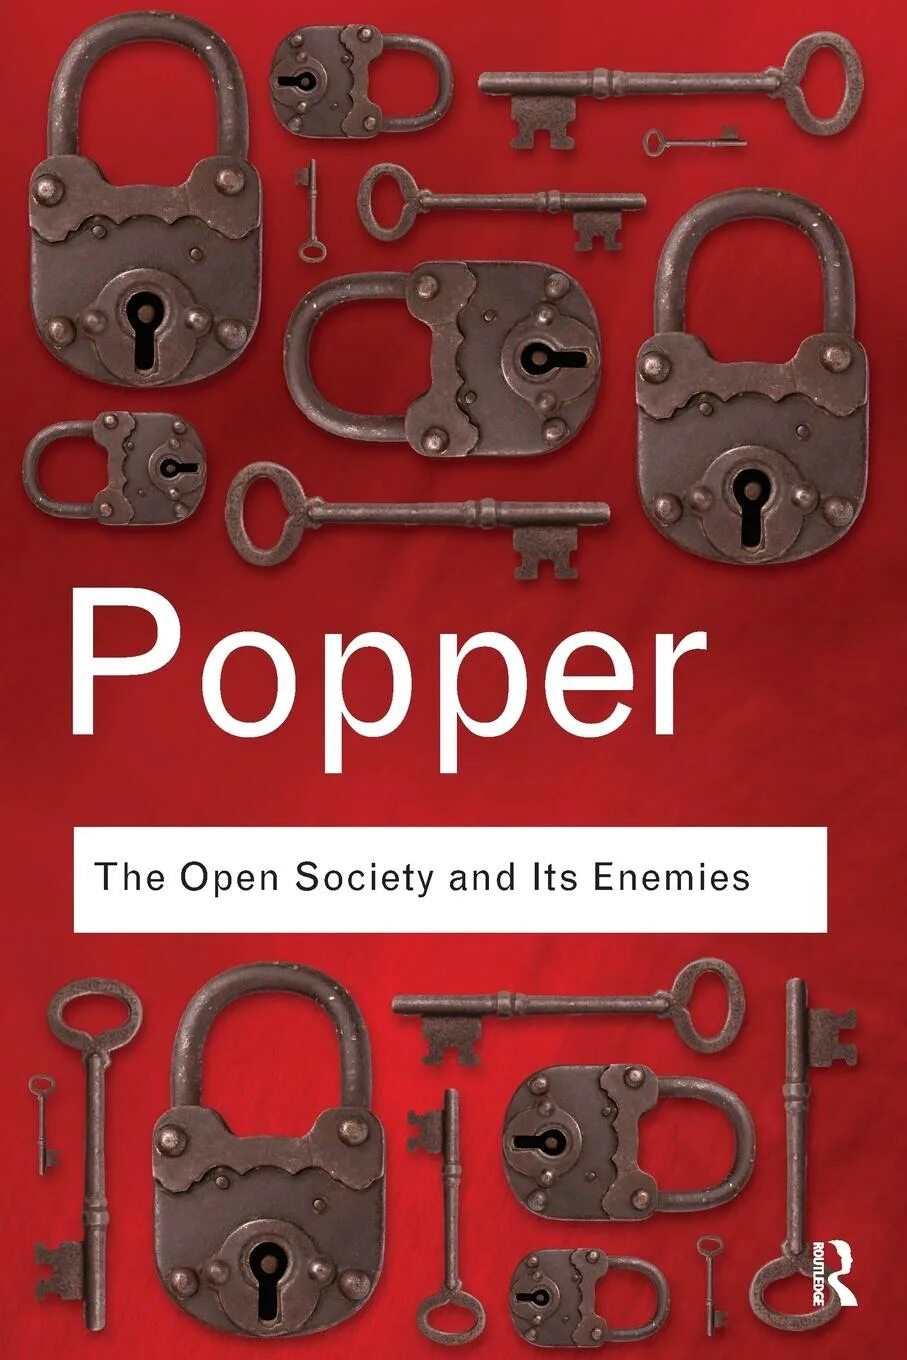 Popper Karl open Society and its Enemies. Open Society and its Enemies. Popper the open Society and its Enemies photos. 'Открытое общество и его враги' (the open Society and its Enemies.